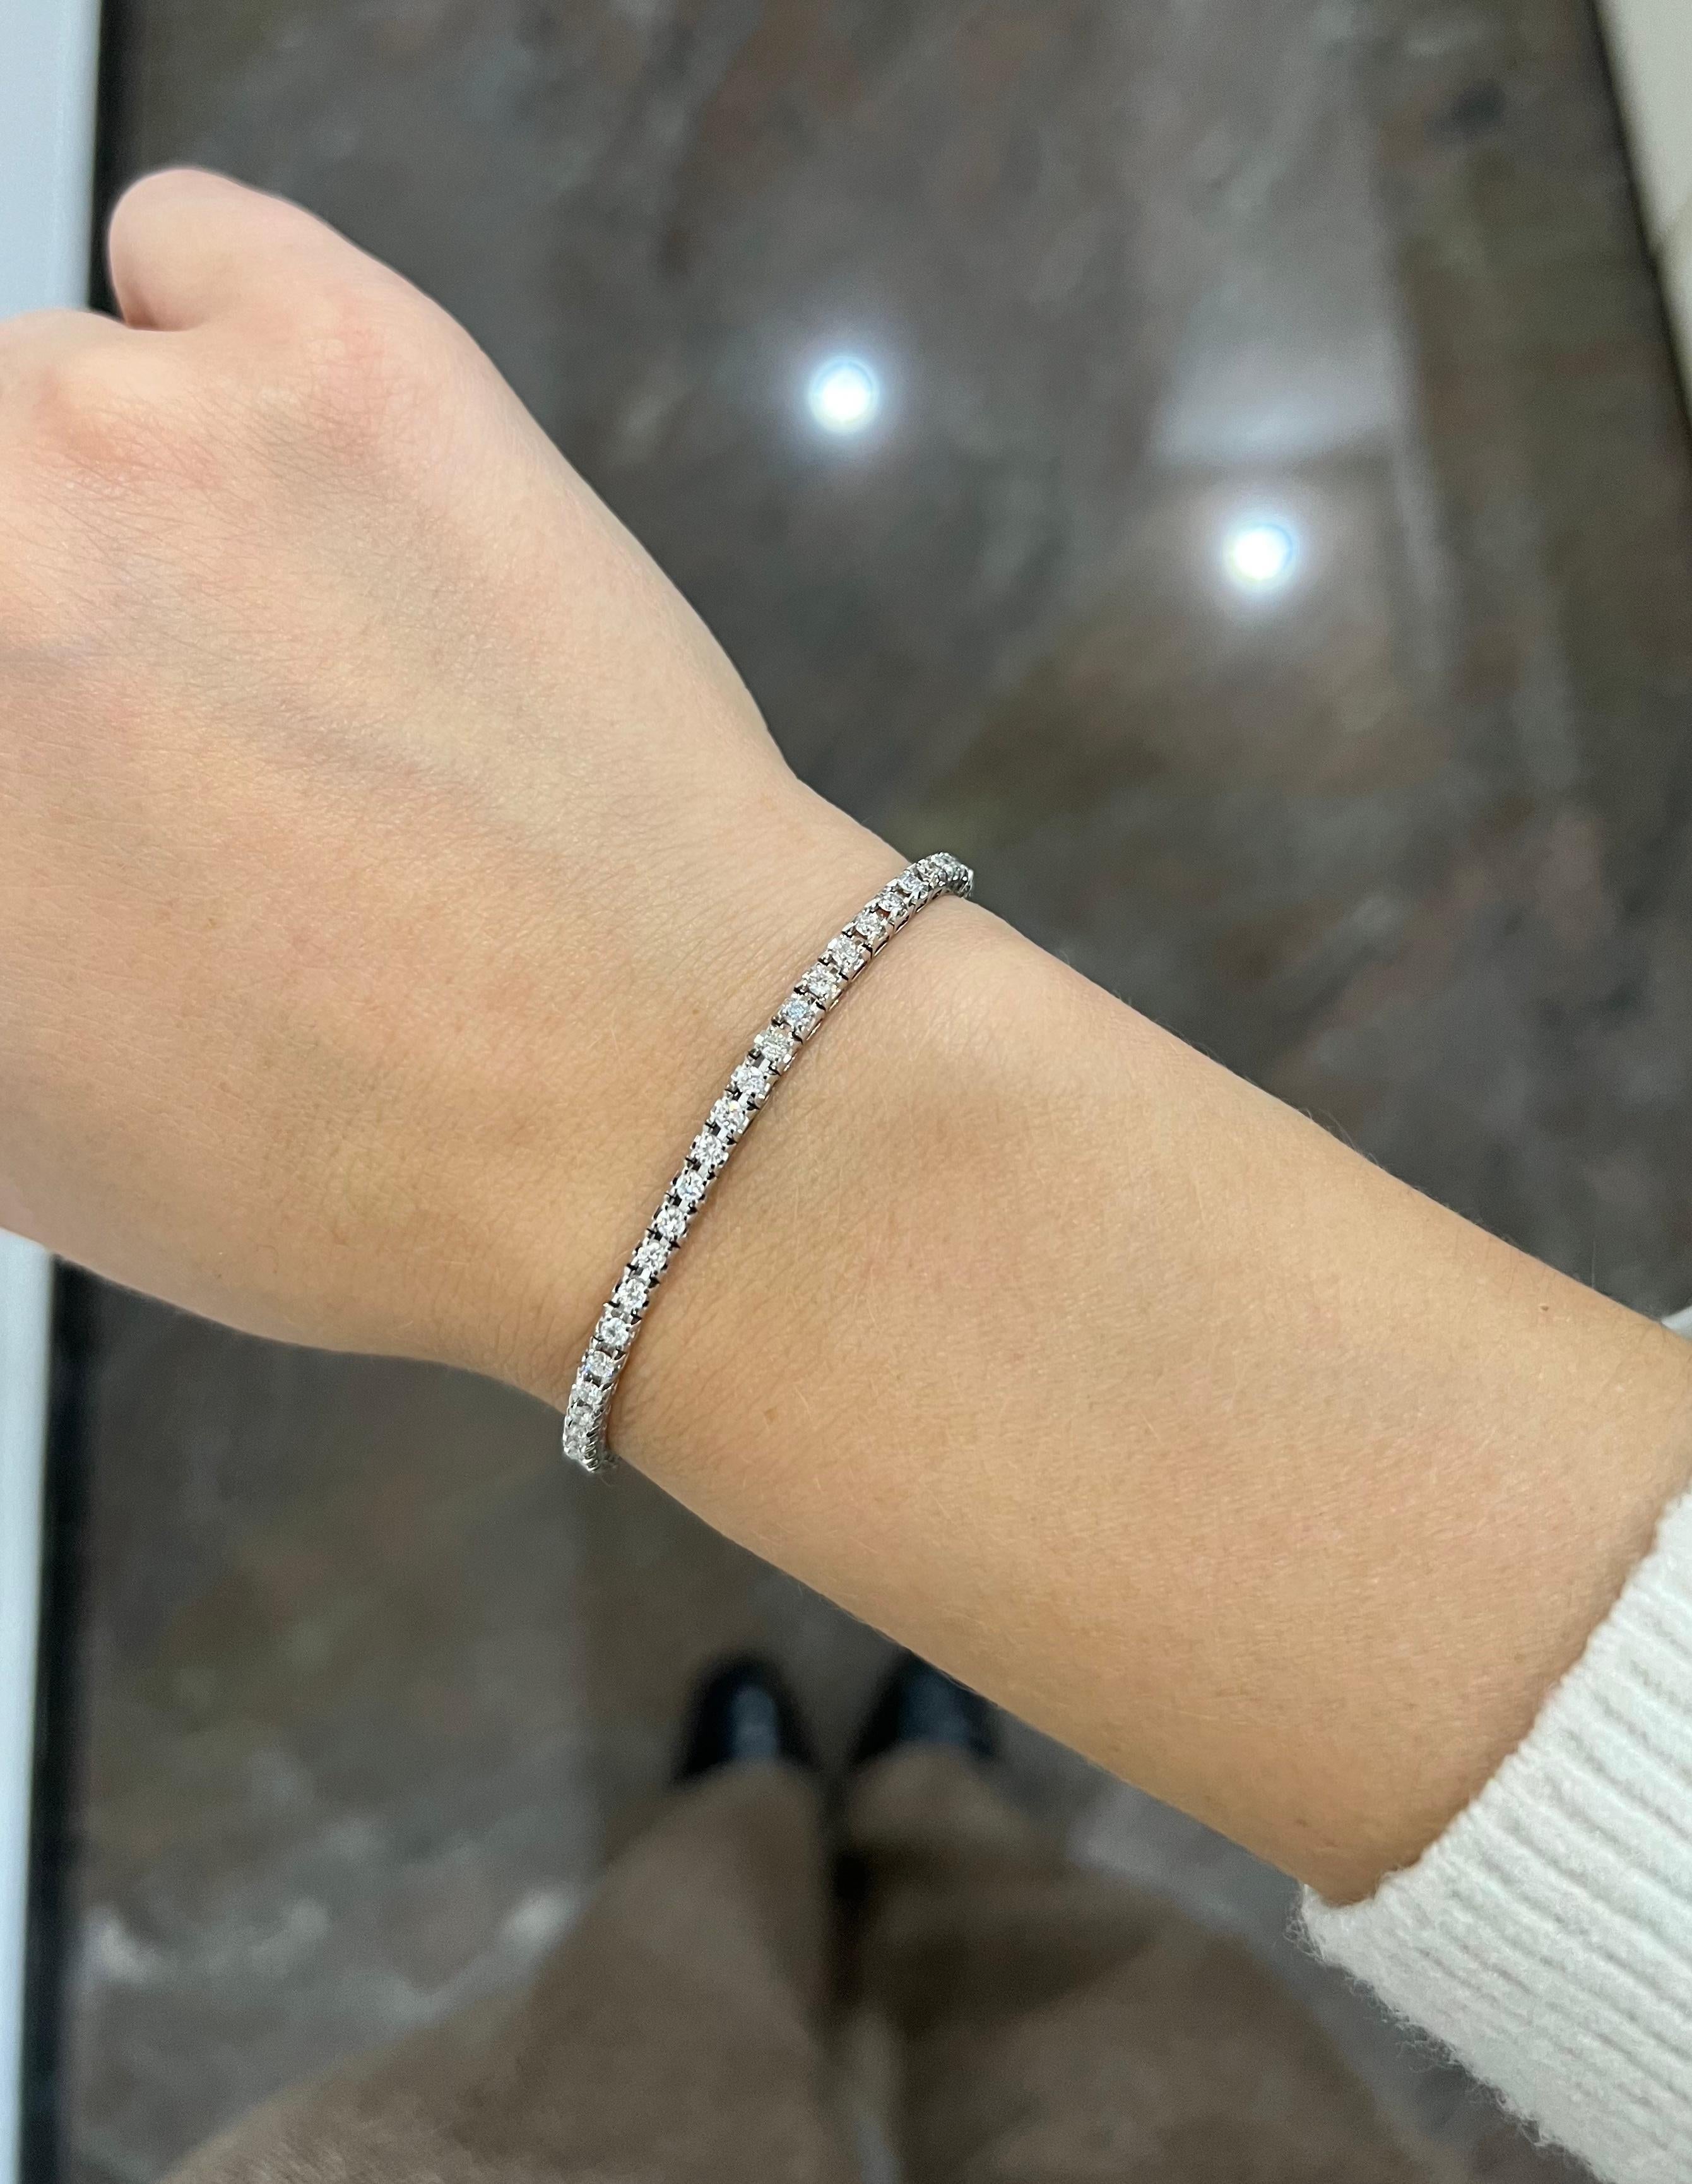 Elevate your style with this exquisite 18K White Gold Four Prong Tennis Bracelet. Crafted with meticulous attention to detail, it features a continuous line of dazzling round-cut natural diamonds, totaling 5.00 carats.

 Each diamond is expertly